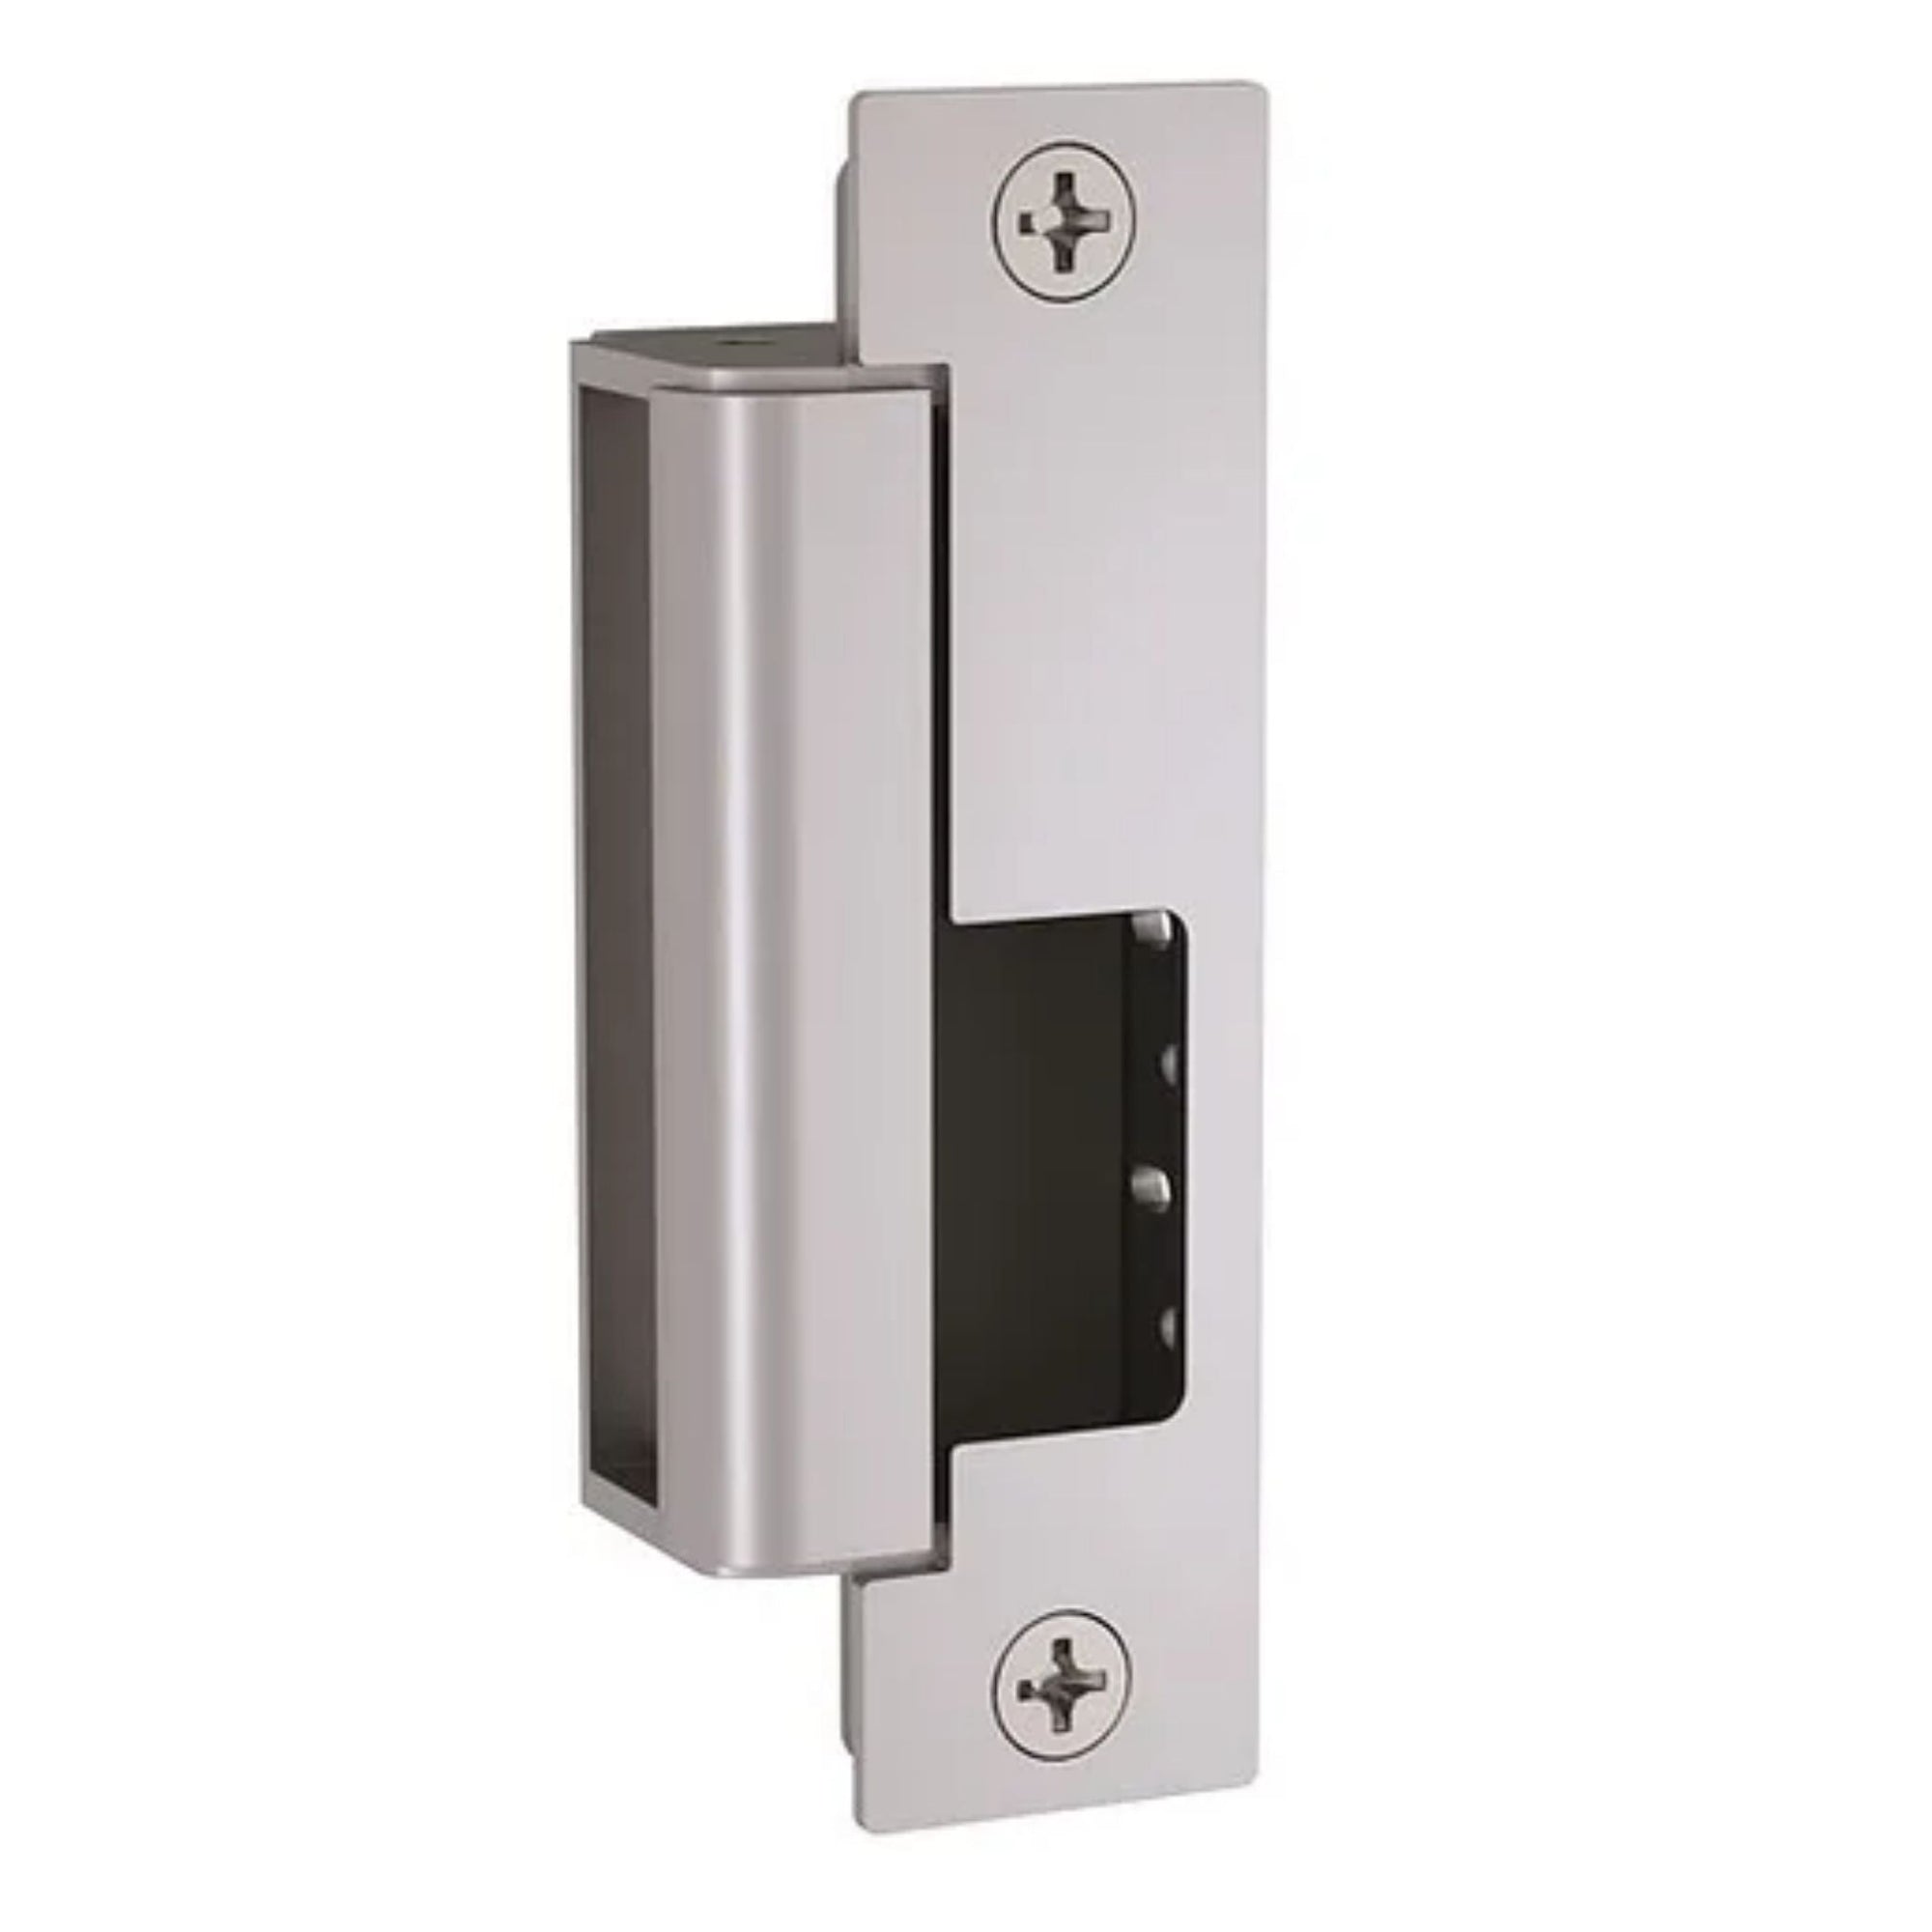 HES 1500-630 Satin Stainless Steel Electric Strike Available with Lock Monitor (LM), Dual Lock Monitors (DLM), Lock Monitor & Strike Monitor (LMS) or Dual Lock Monitors & Strike Monitors (DLMS)